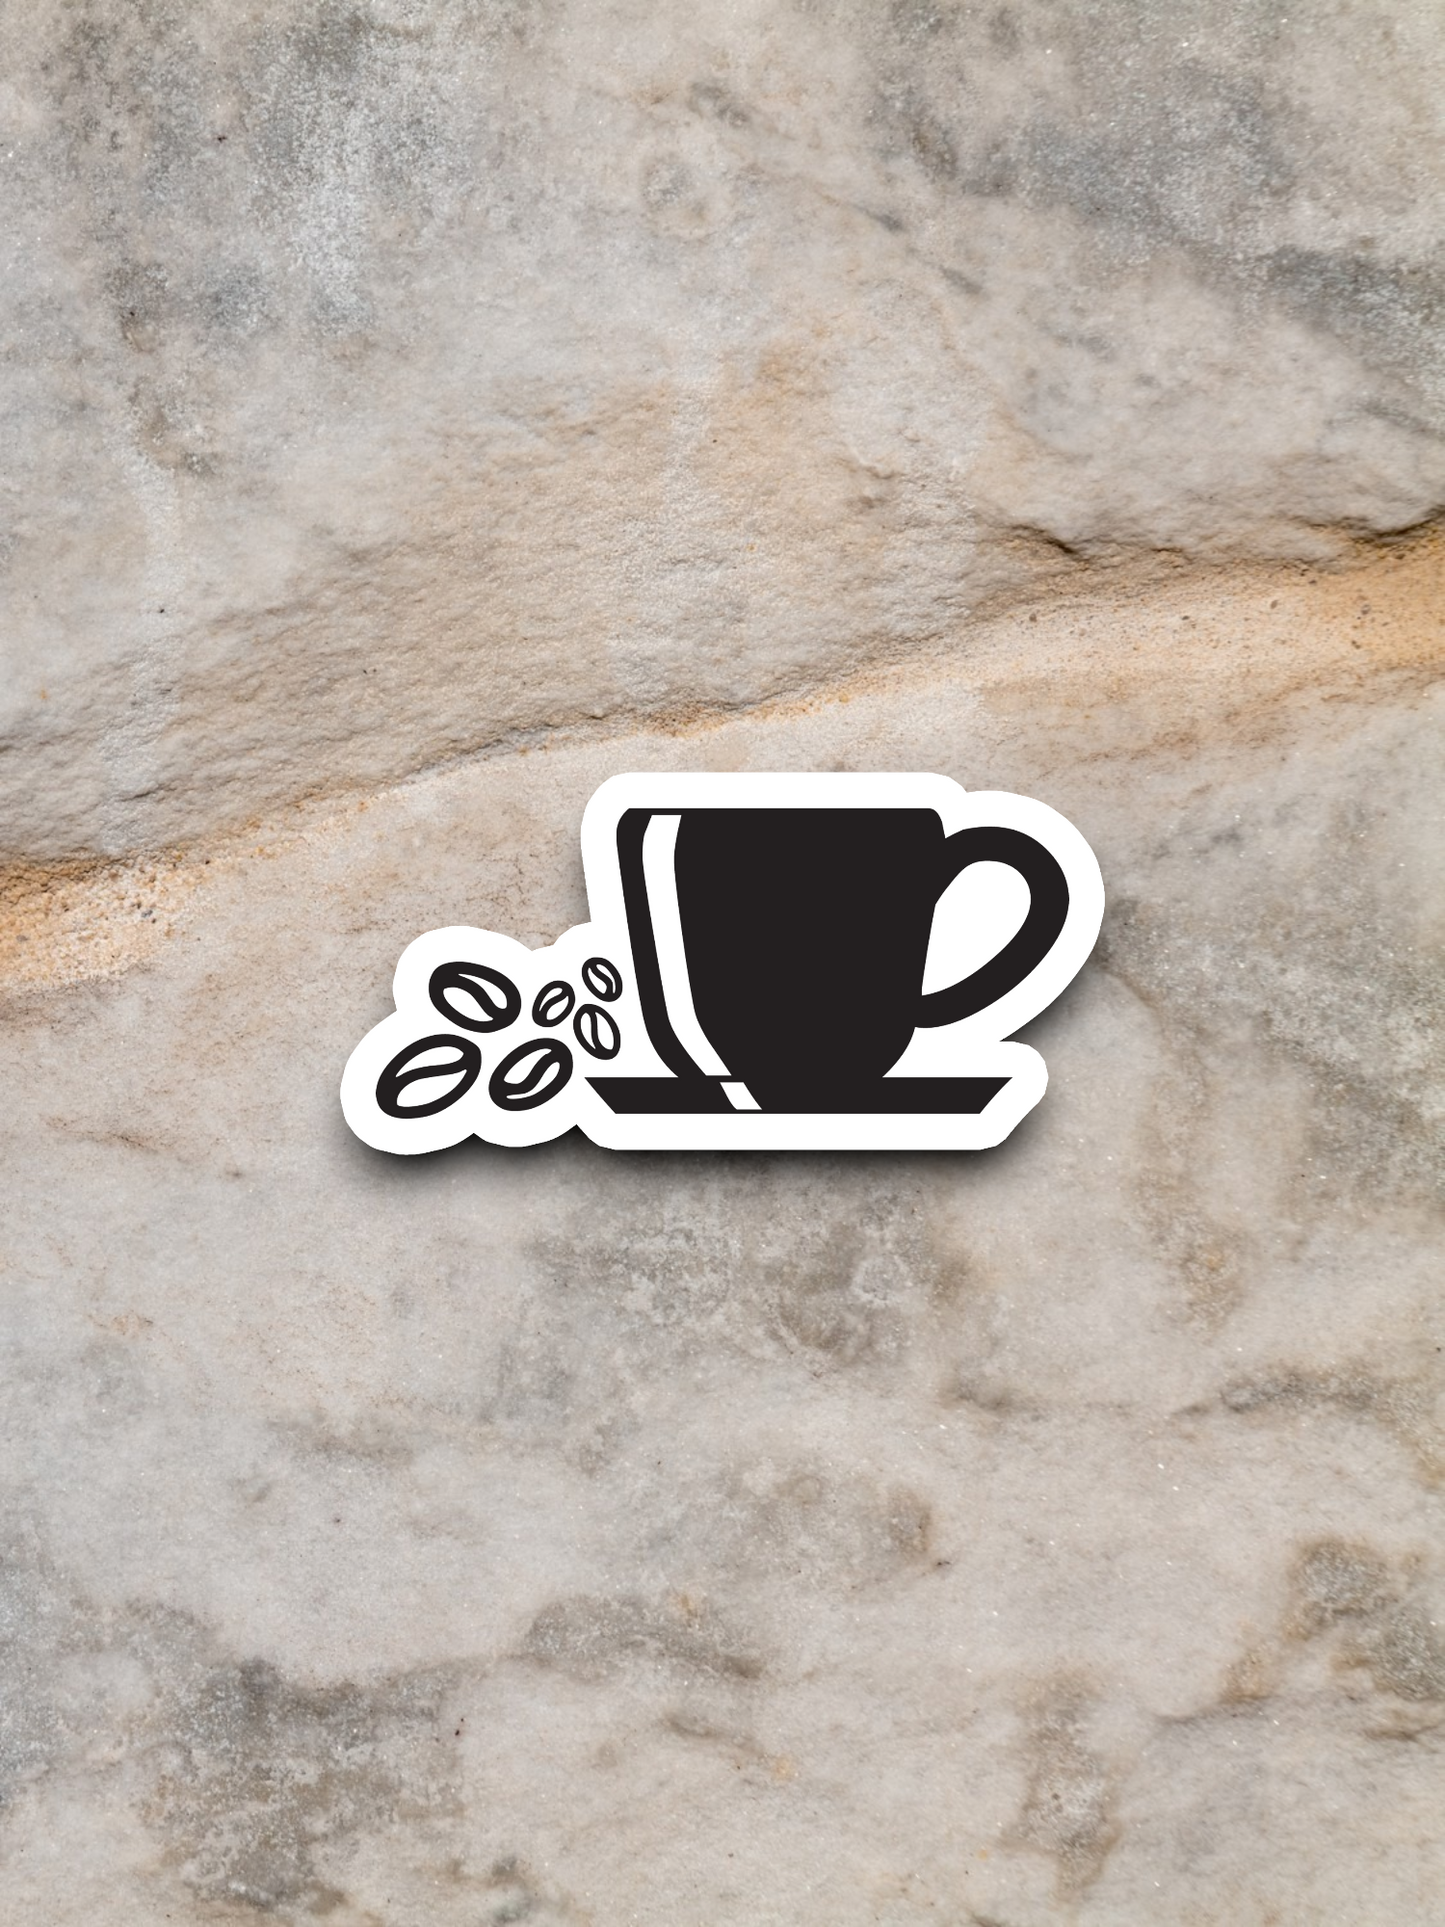 Coffee Cup and Coffee Beans Version 1 - Coffee Sticker